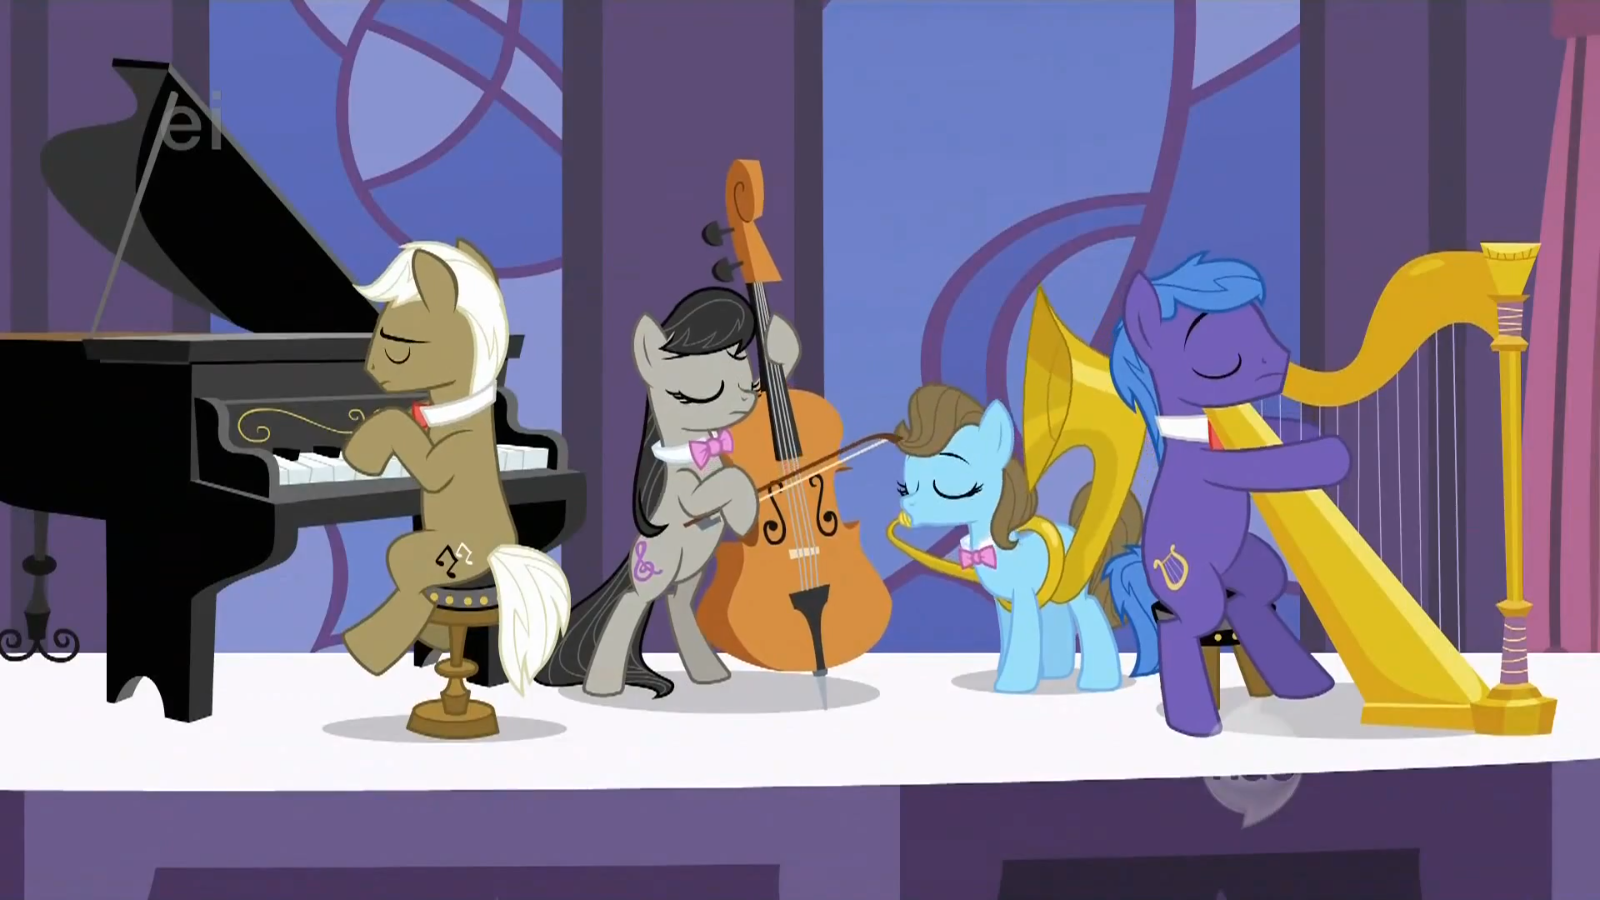 http://vignette4.wikia.nocookie.net/mlp/images/f/f5/Orchestra_begins_to_play_Pony_Pokey_song_S1E26.png/revision/20121111045741